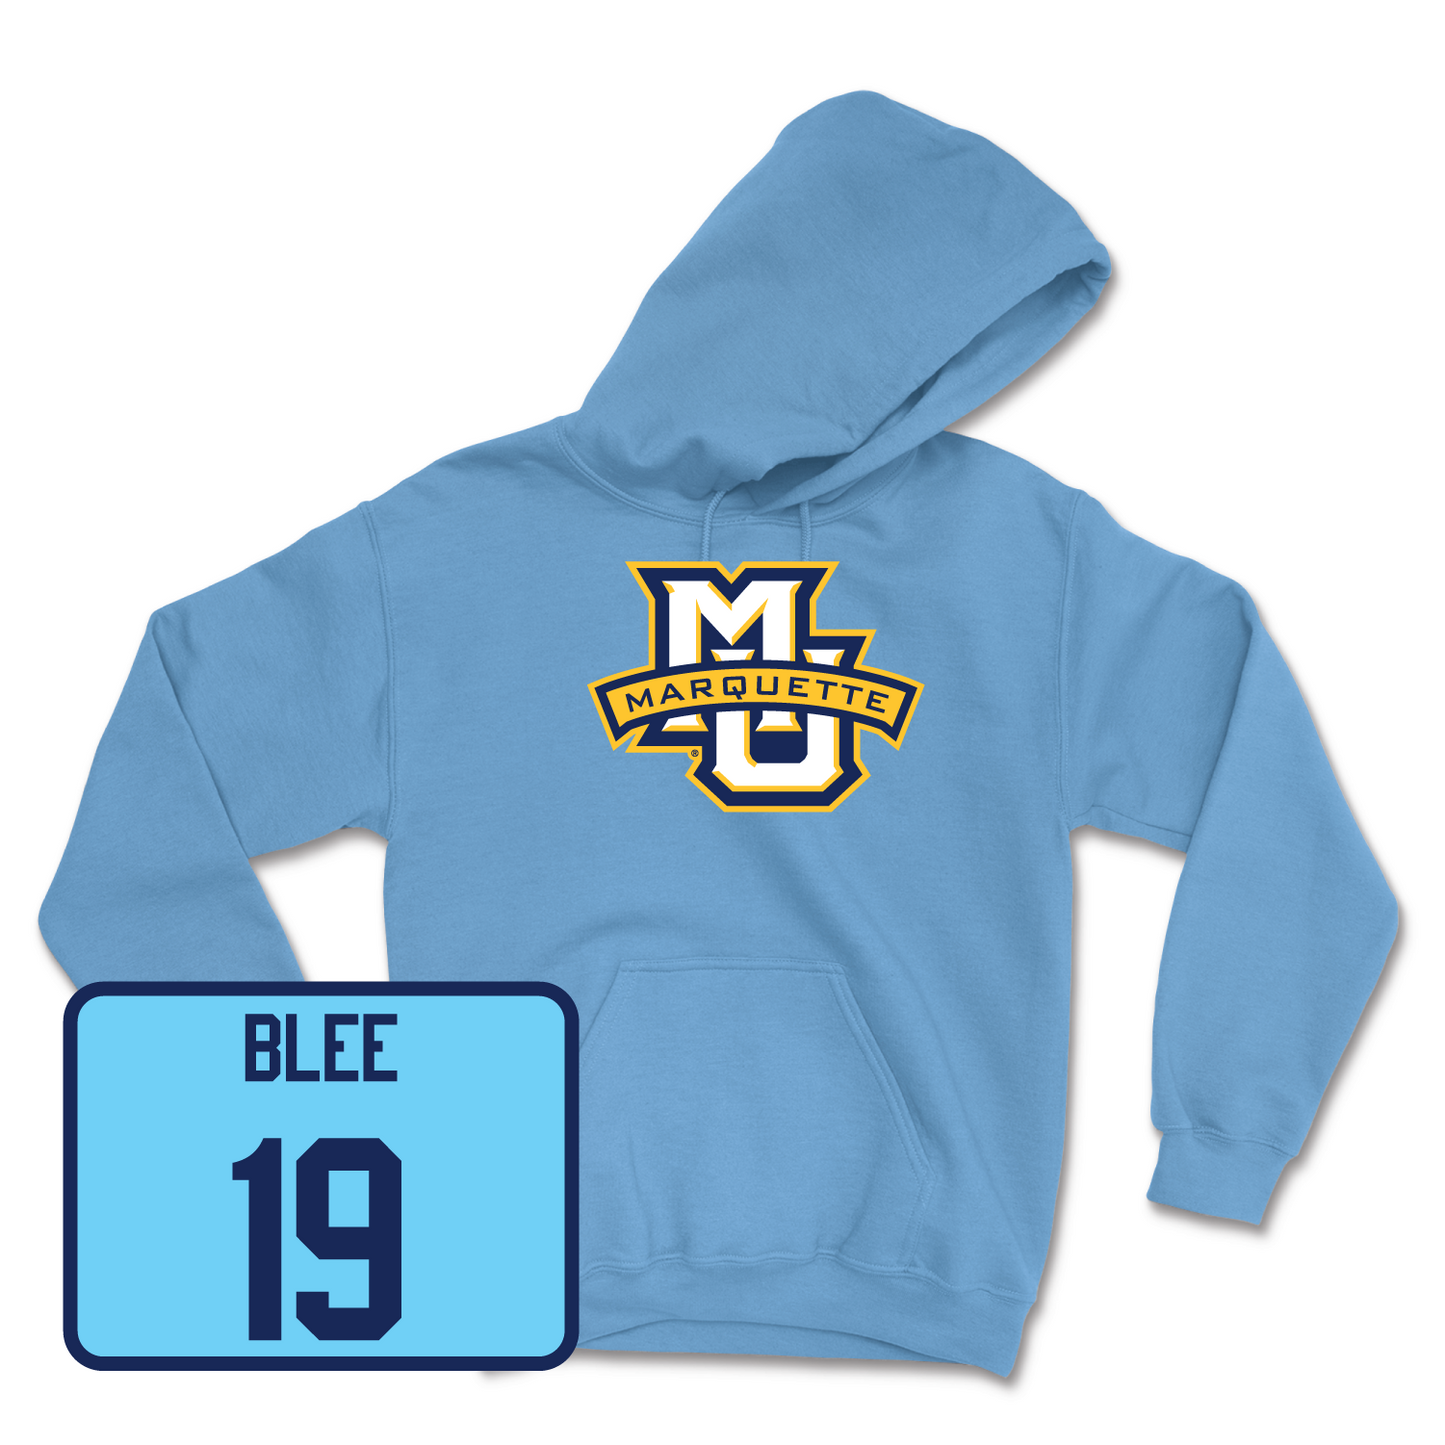 Championship Blue Women's Lacrosse Marquette Hoodie 2 2X-Large / Mary Blee | #19